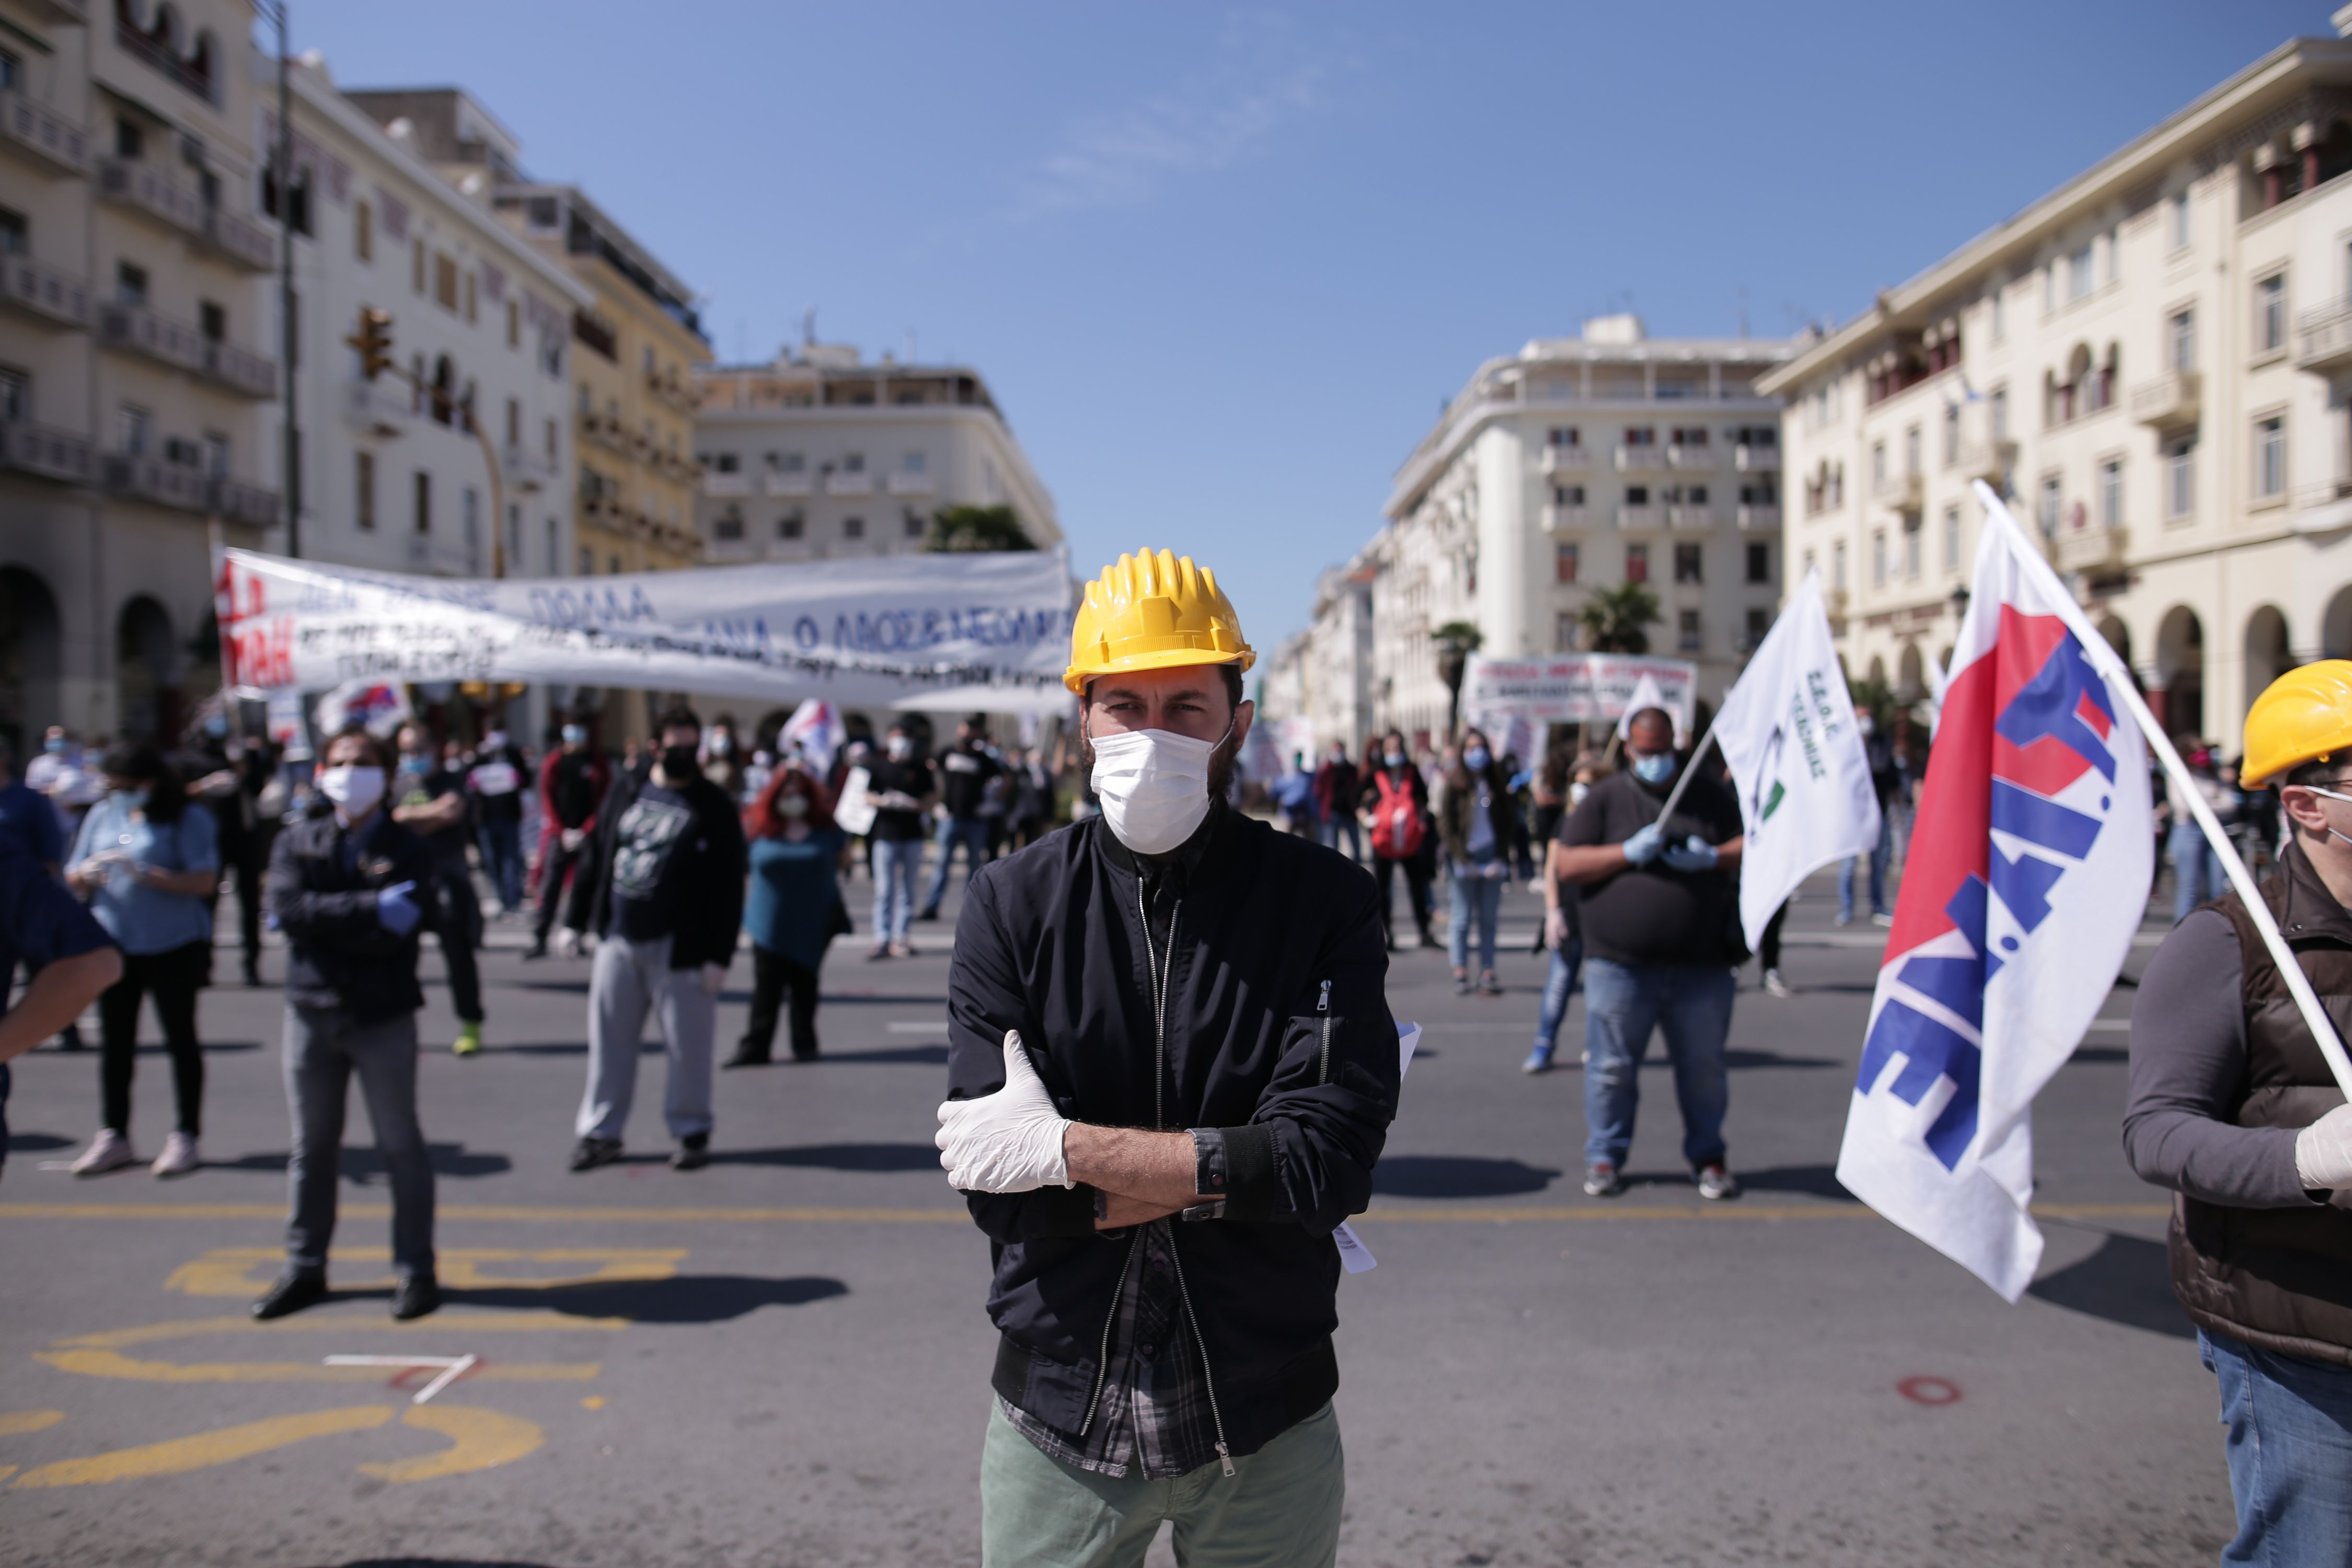 In this image, a man wearing a face mask and hard hats stands in the middle of a square during a protest